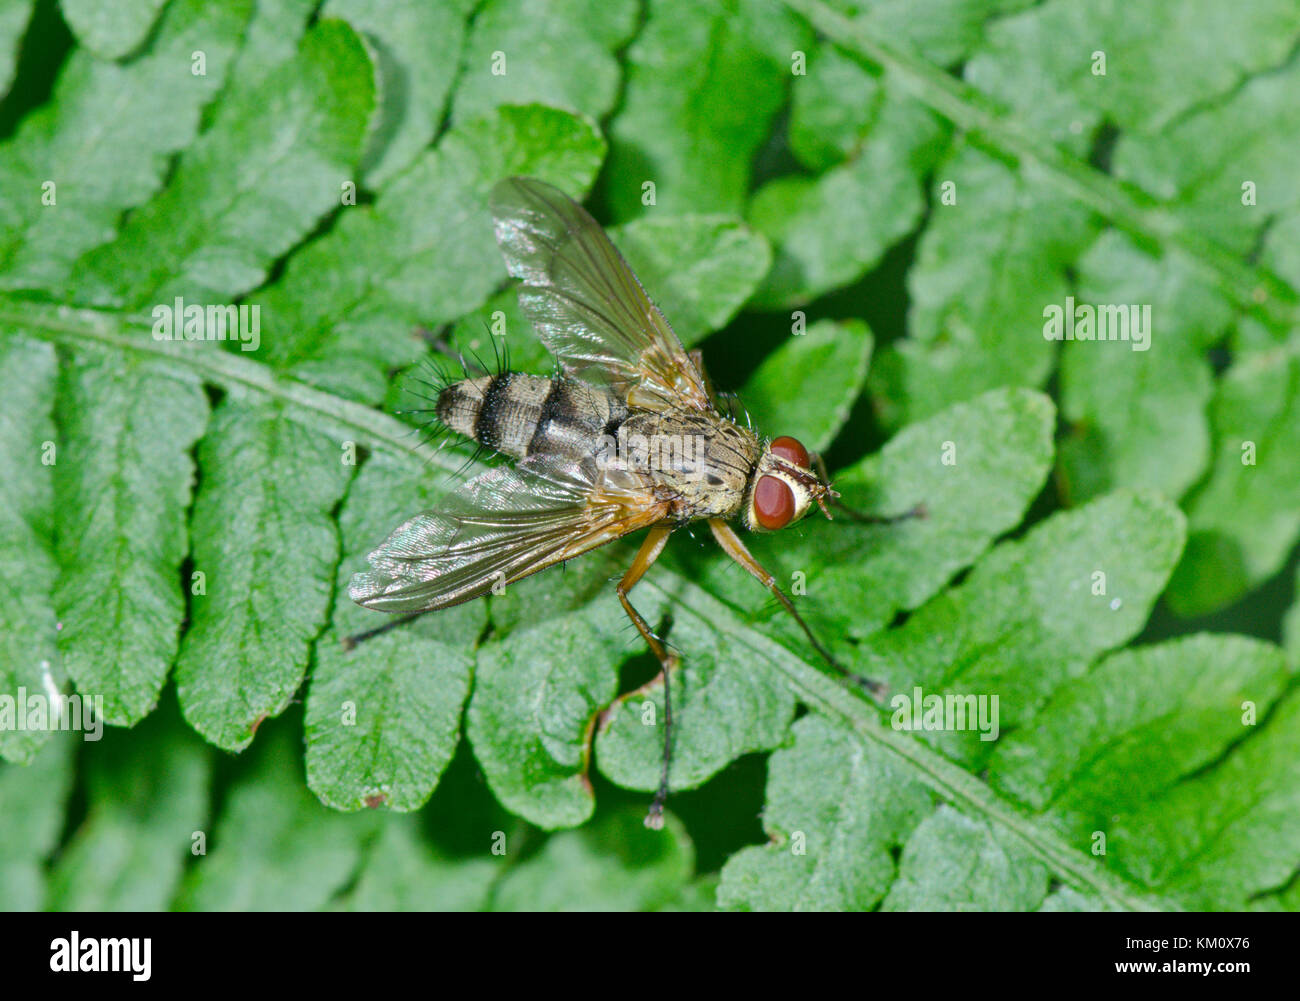 A Long legged Tachinid Fly (Dexia sp) Sussex, UK Stock Photo